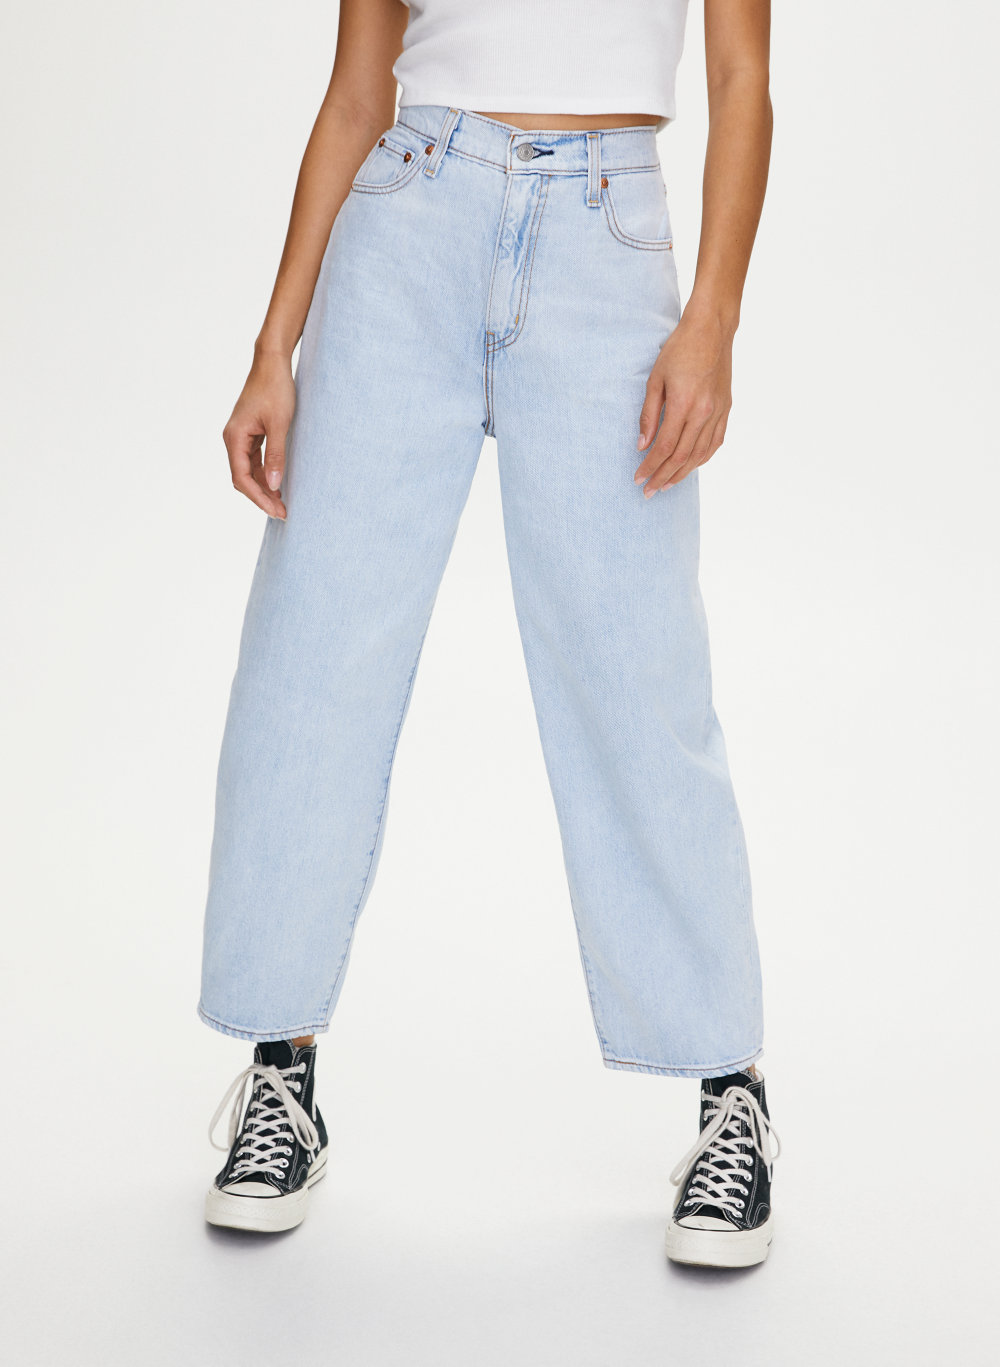 balloon jeans for womens